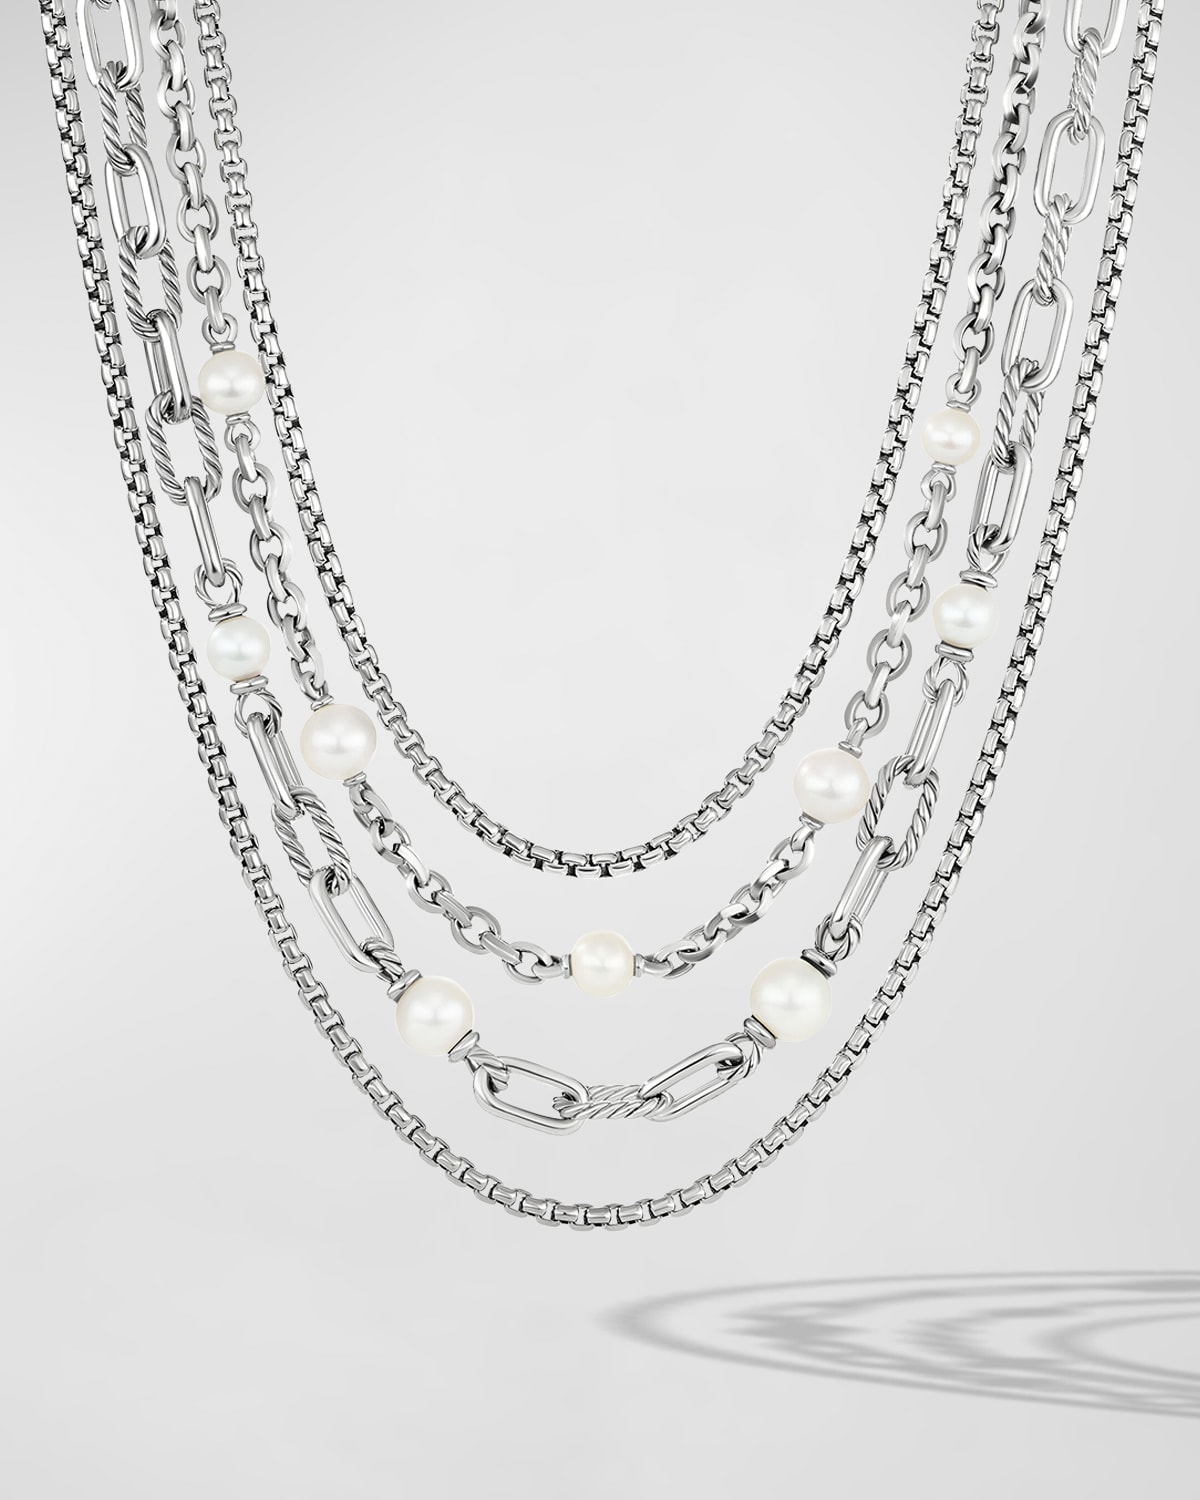 David Yurman Dy Madison Multi Row Chain Necklace With Pearls In Silver, 10.5mm, 19.5"l